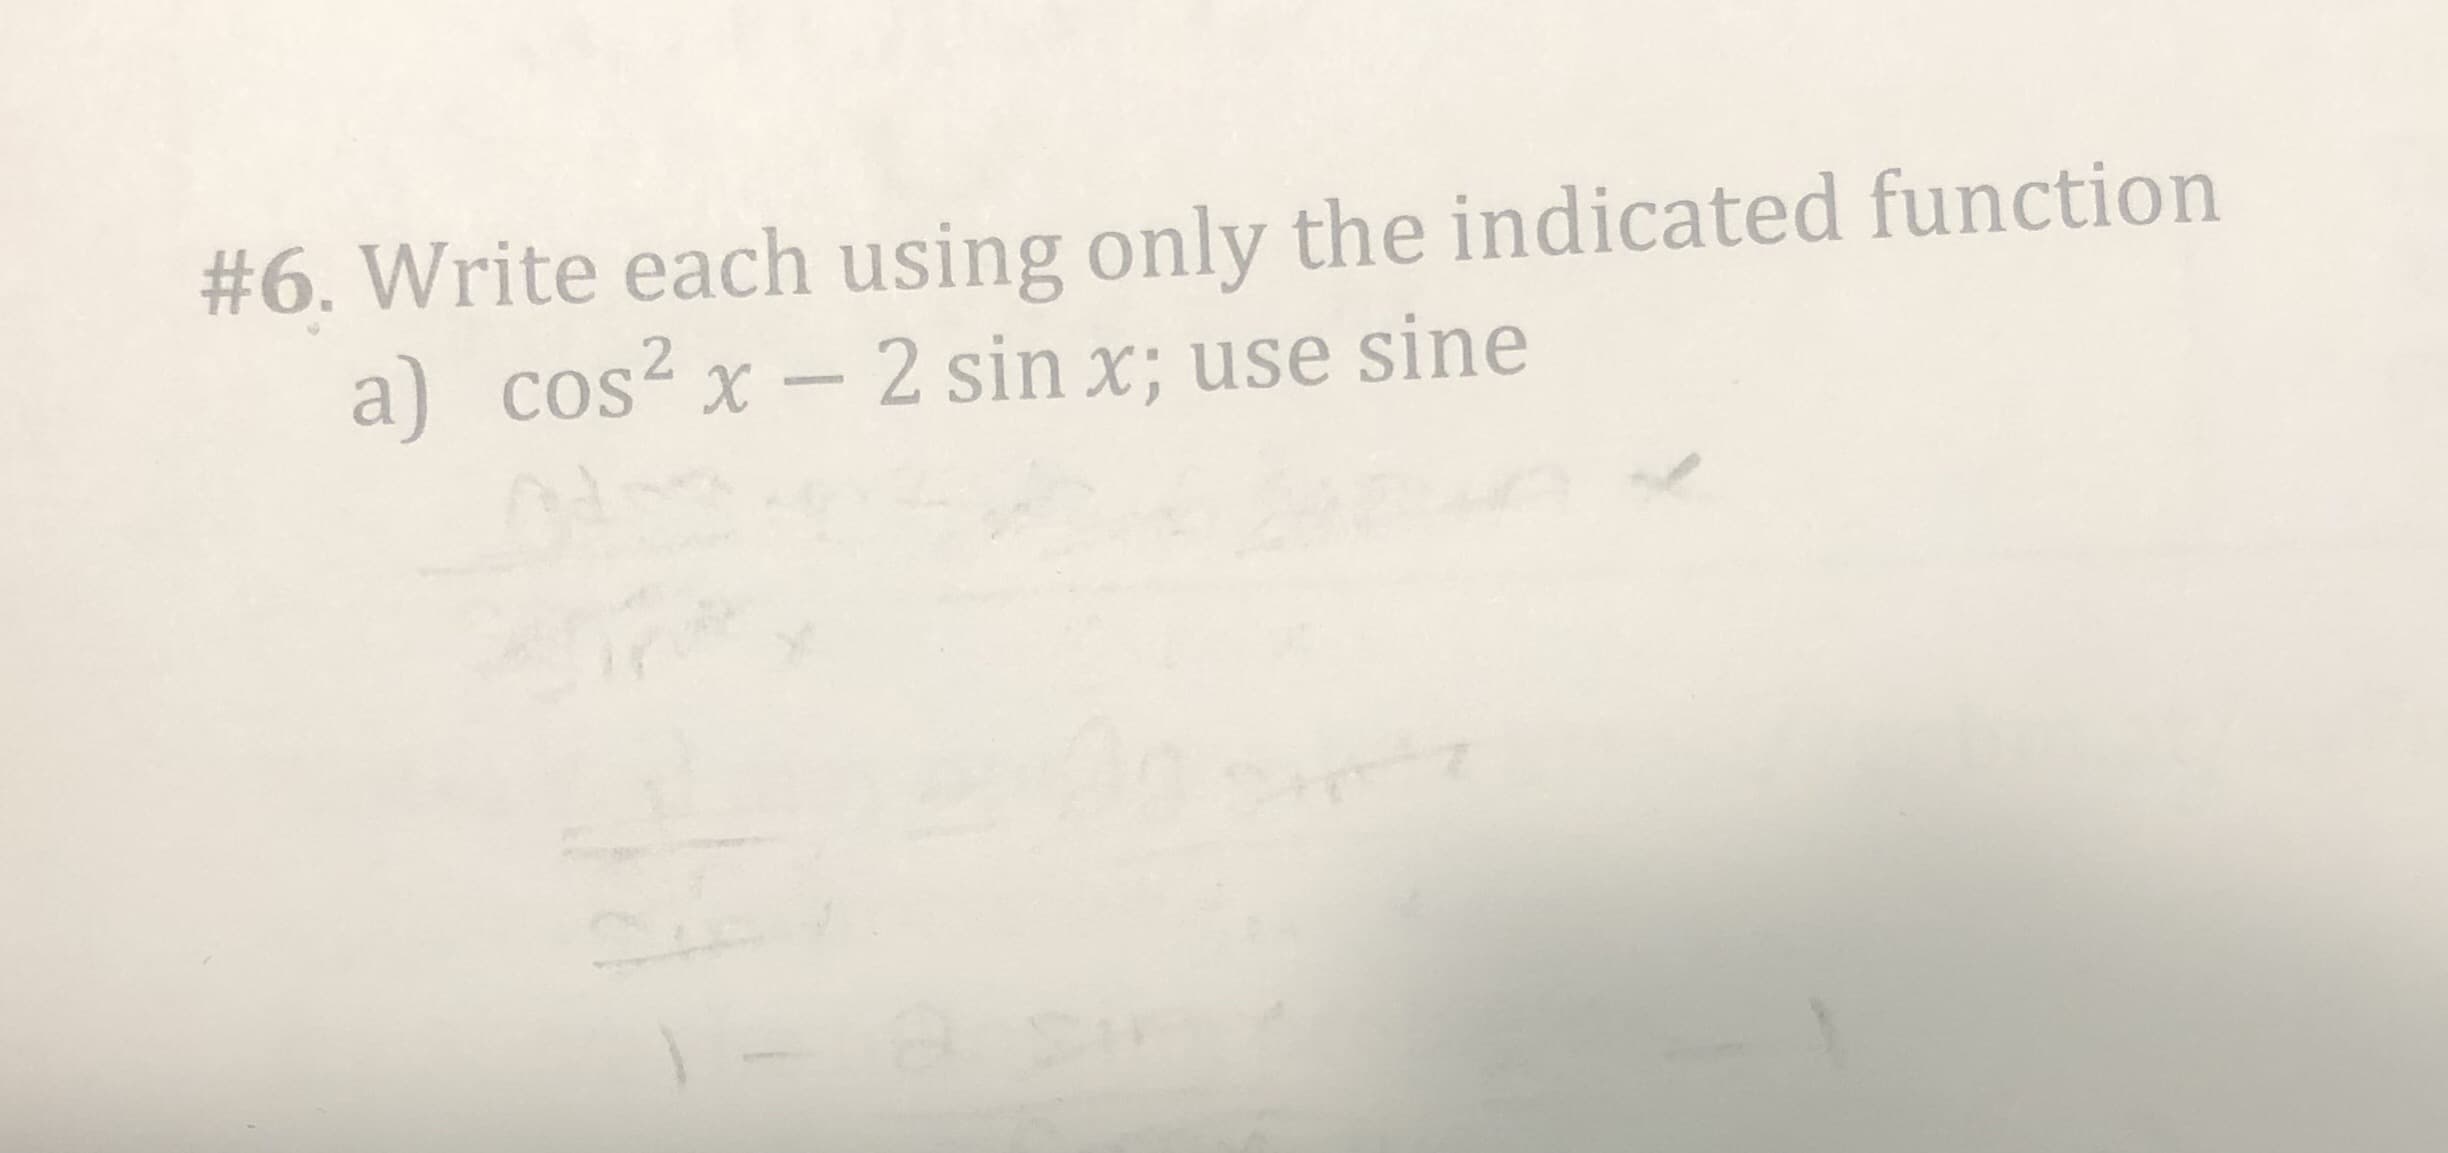 #6. Write each using only the indicated function
a) cos? x - 2 sin x; use sine
